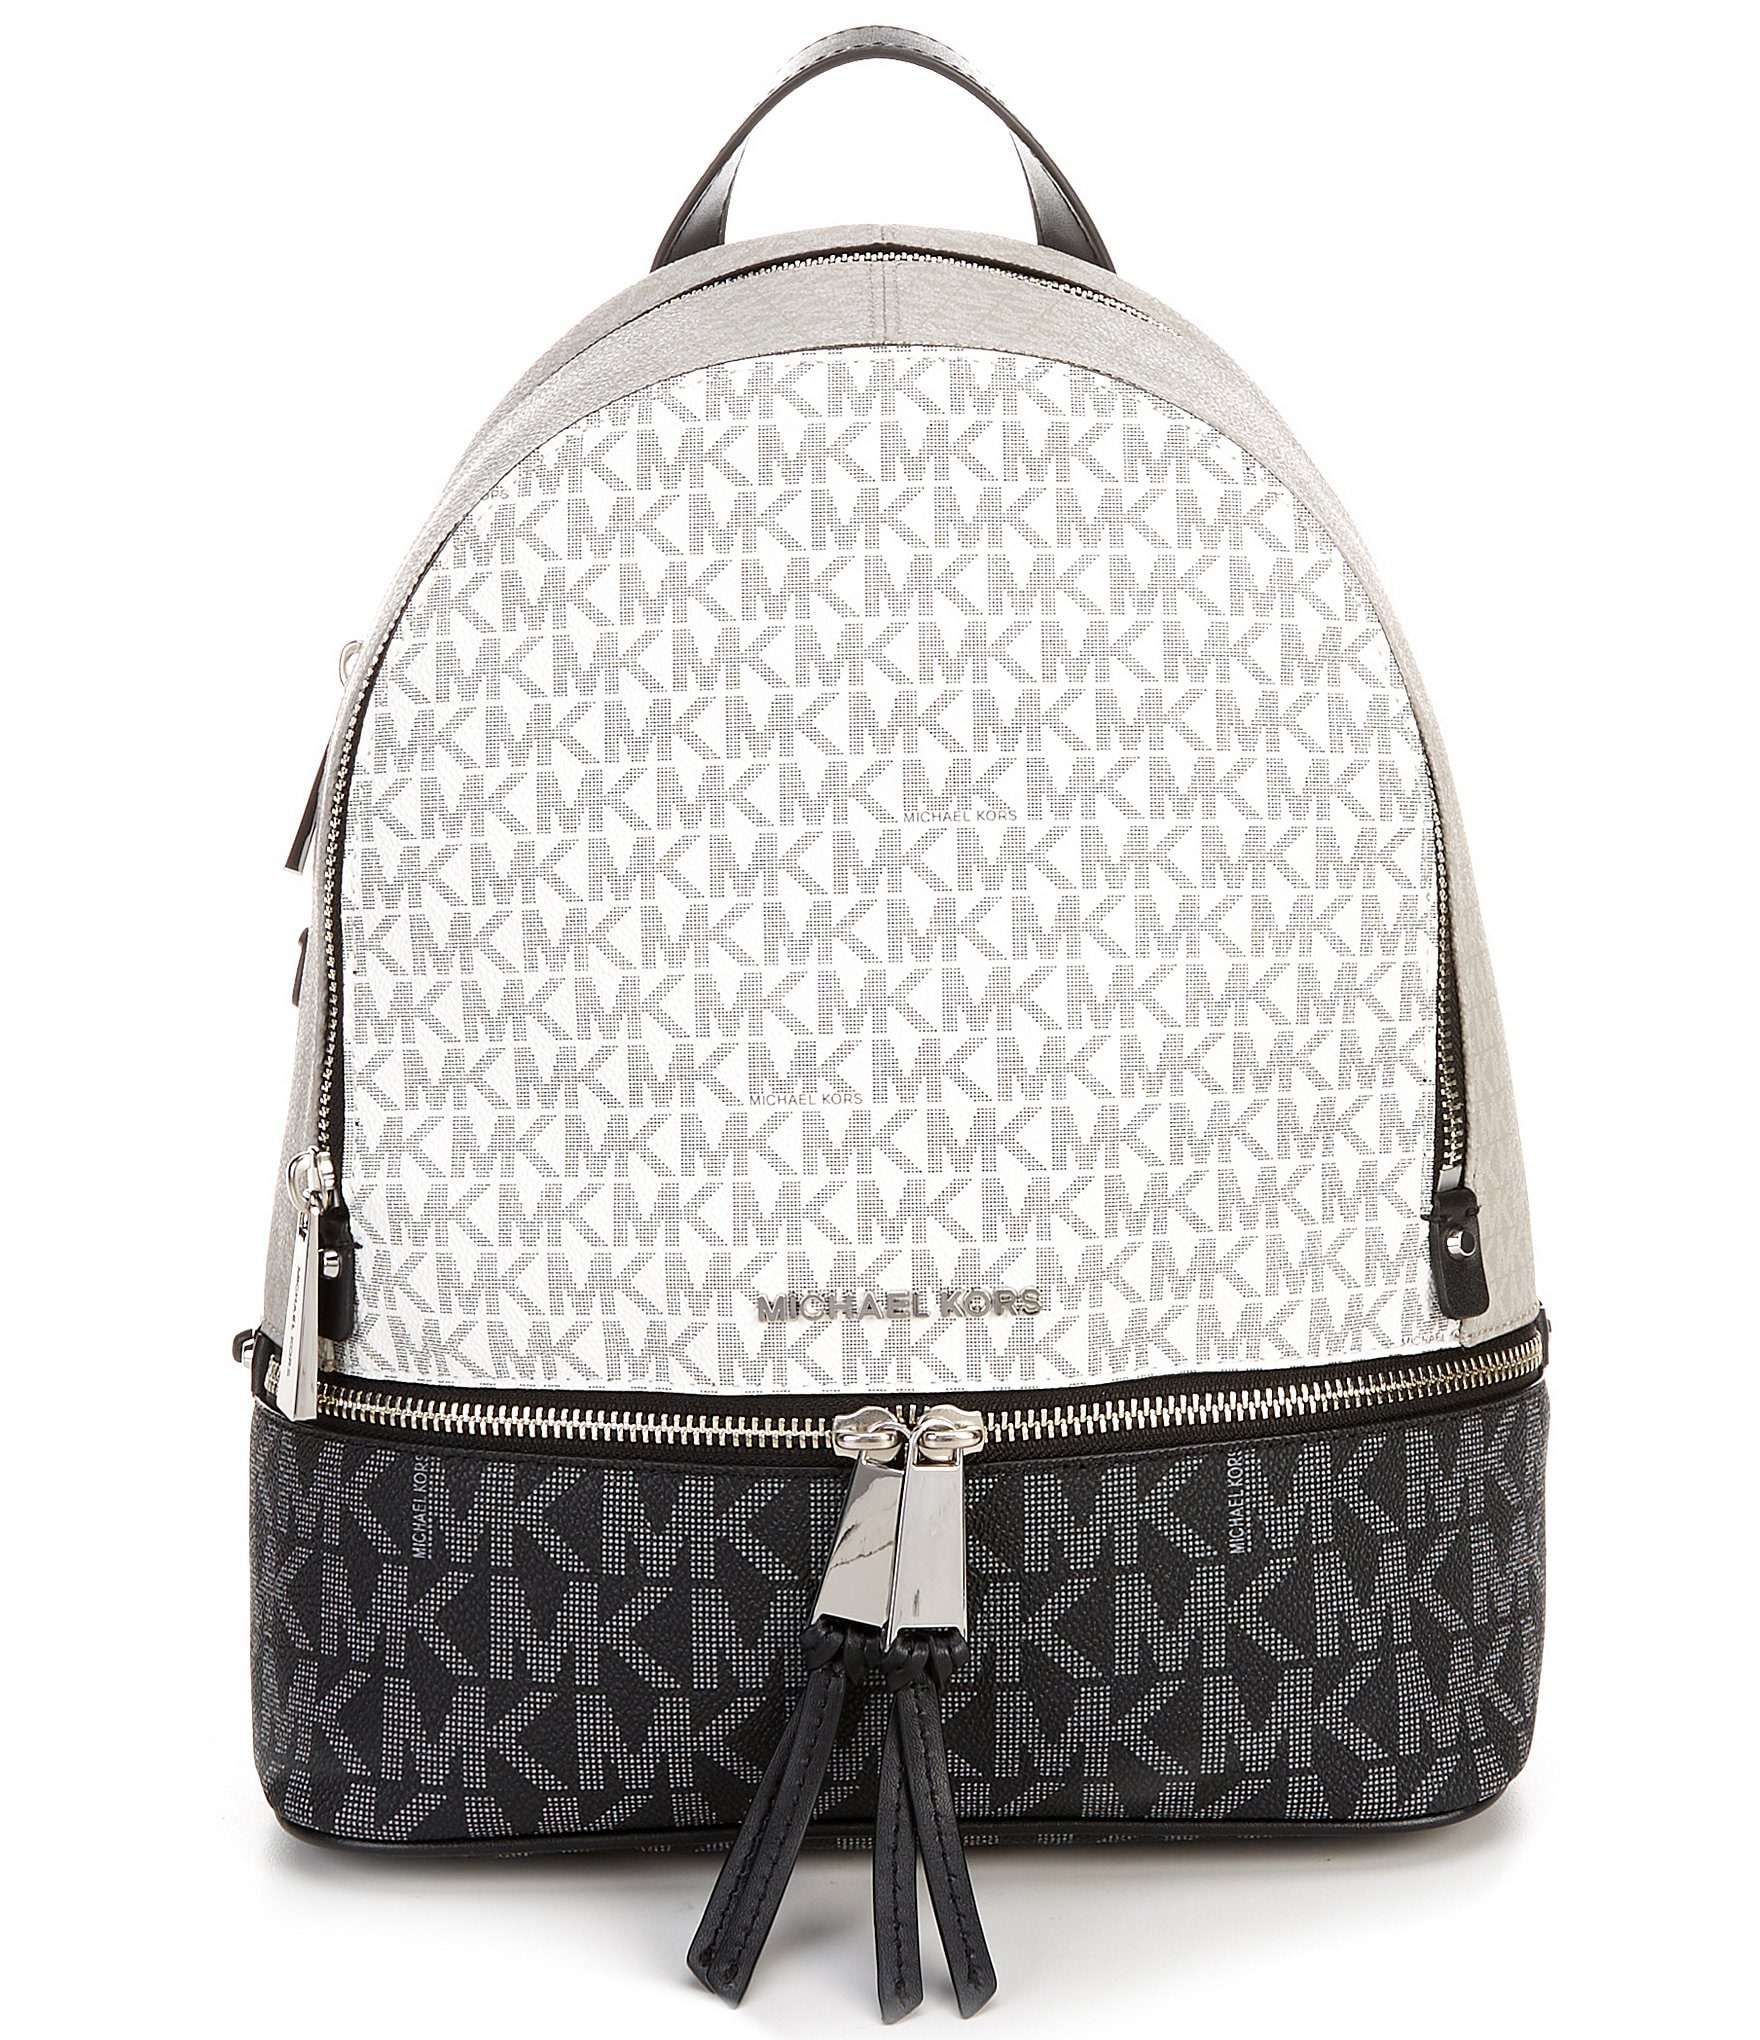 Score 25 Off This Chic Backpack in the Macys Michael Kors Sale